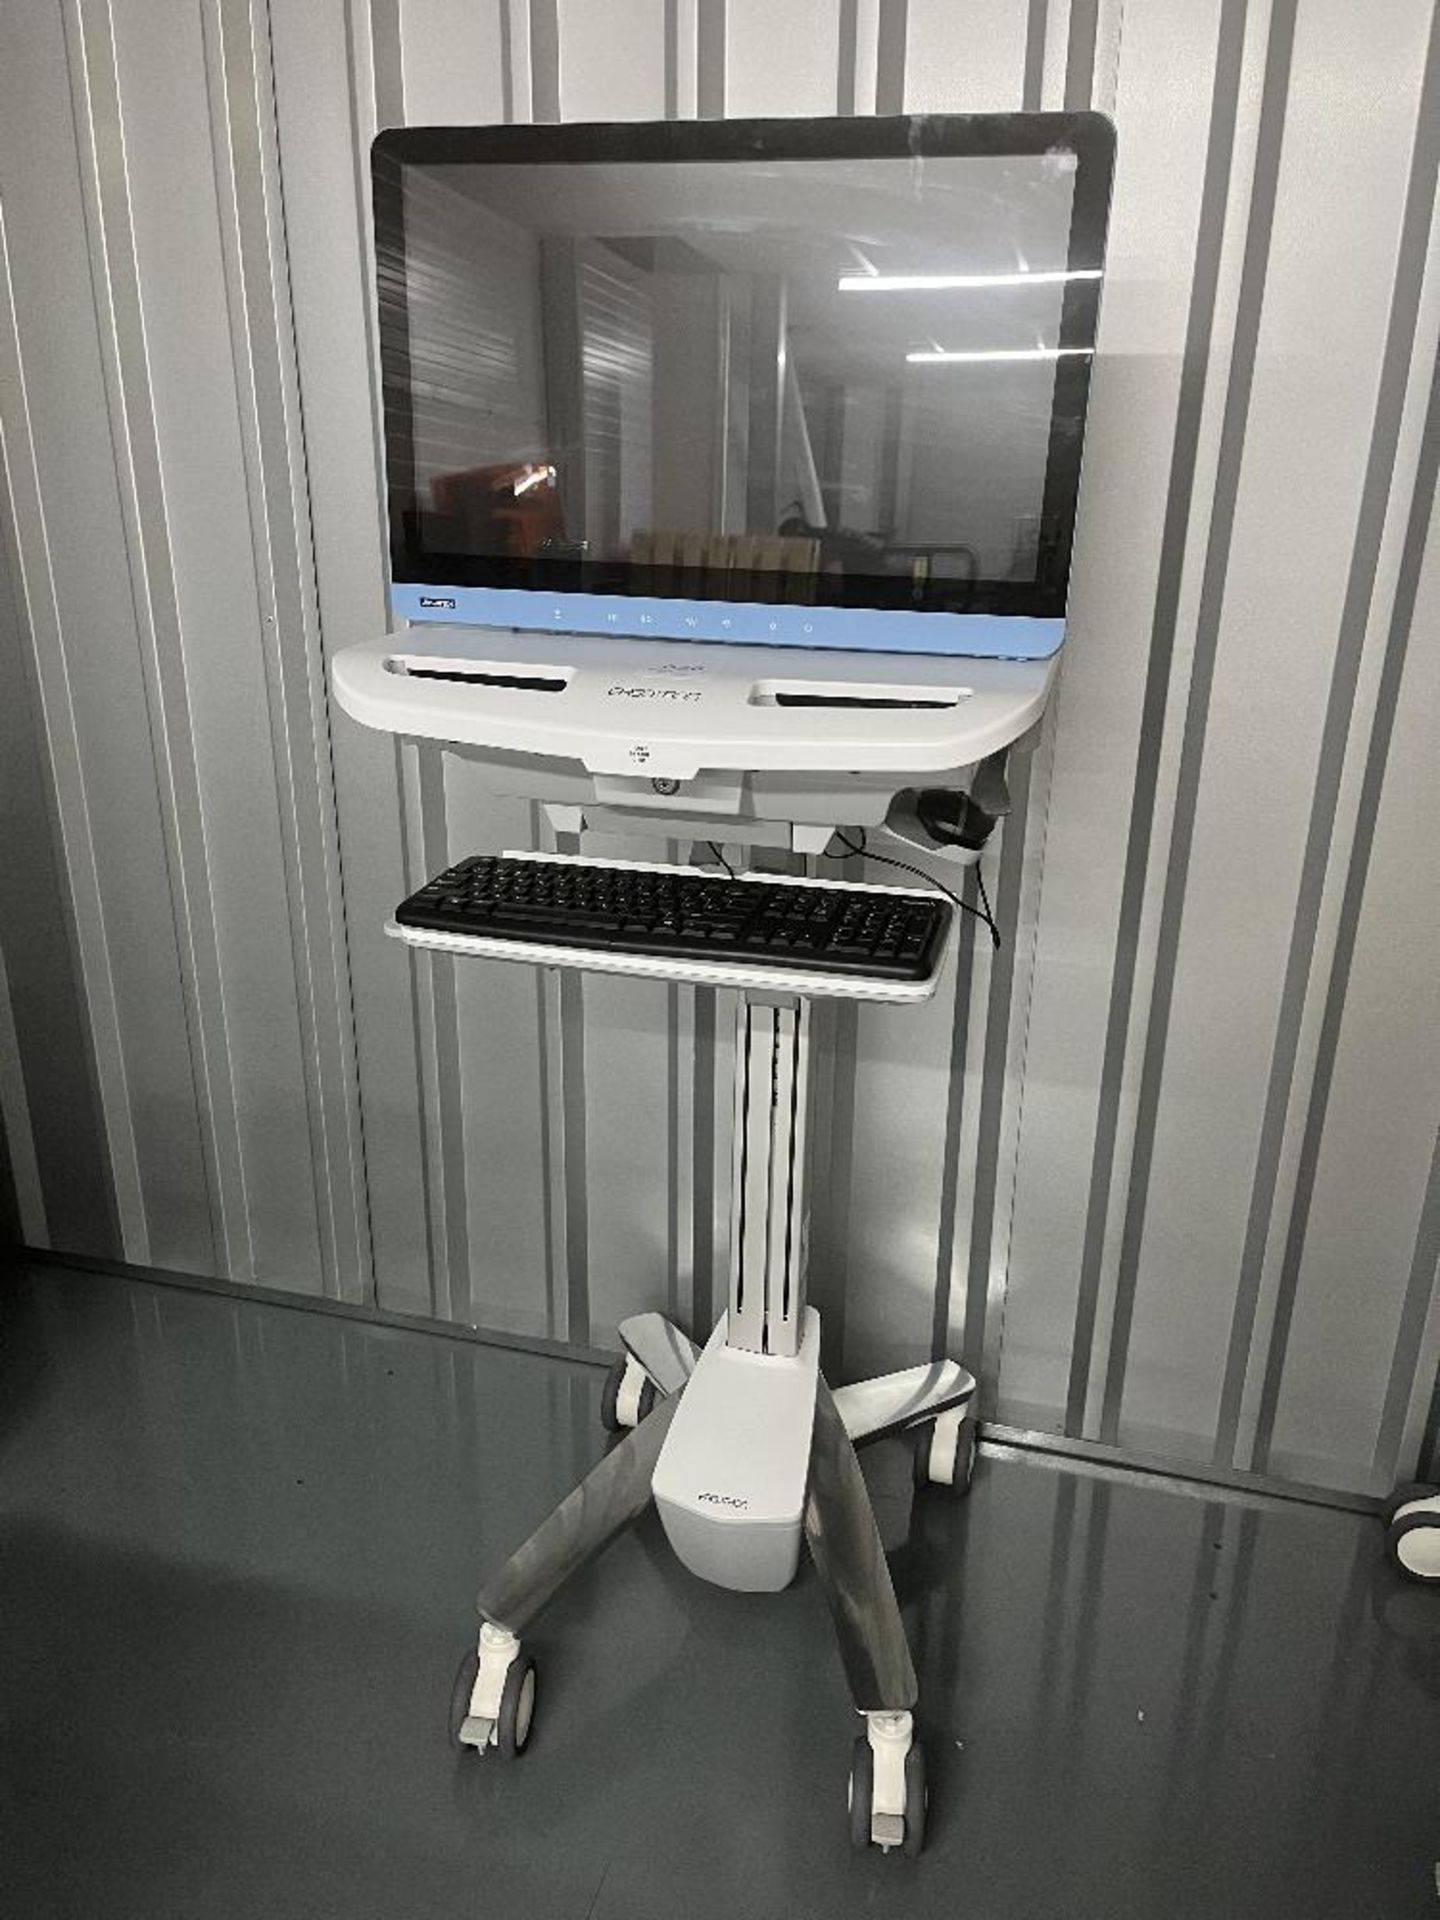 Ergotron Styleview Cart Type SV41-6200-0 Full Featured Medical Cart with Advantech POC-624-01 AIO PC - Image 2 of 9